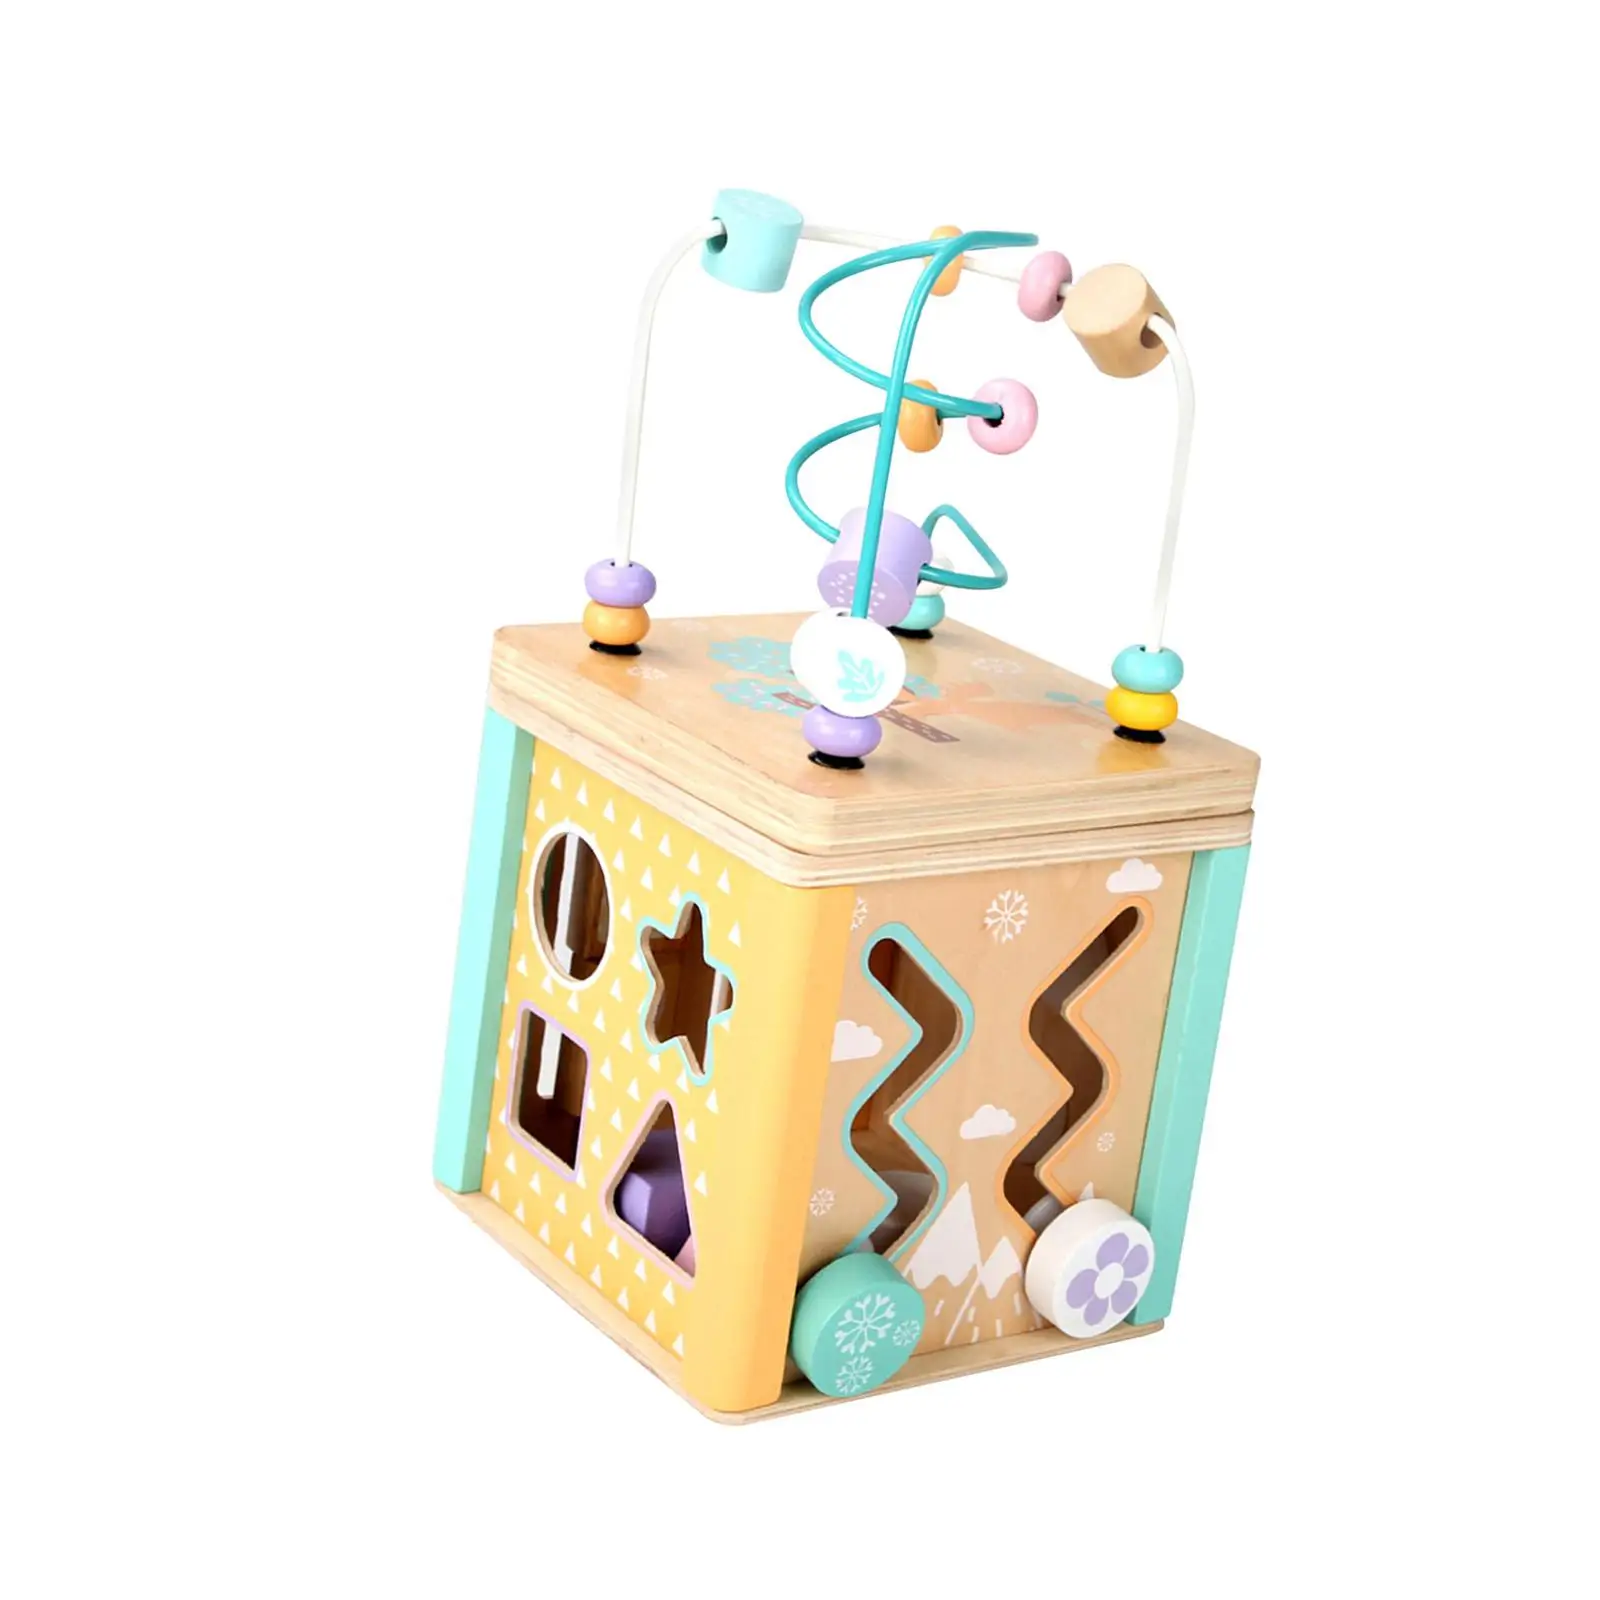 Activity Cube Toys Early Learning Colorful Montessori Game Wooden Educational Toy Developmental Toys Bead Maze Toy for Children